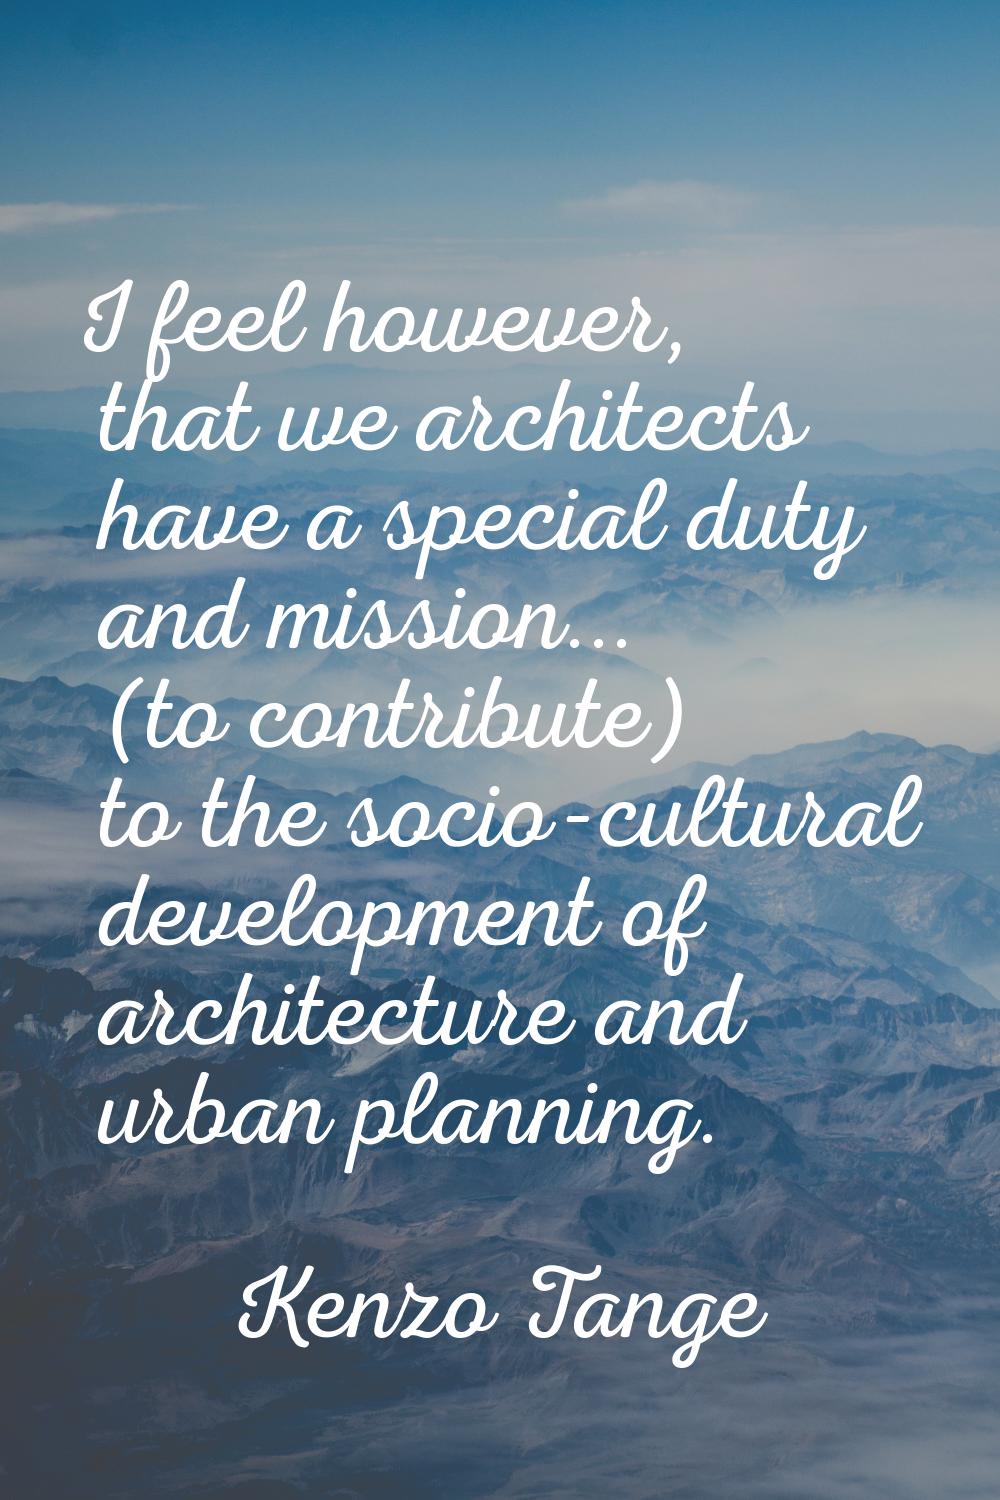 I feel however, that we architects have a special duty and mission... (to contribute) to the socio-